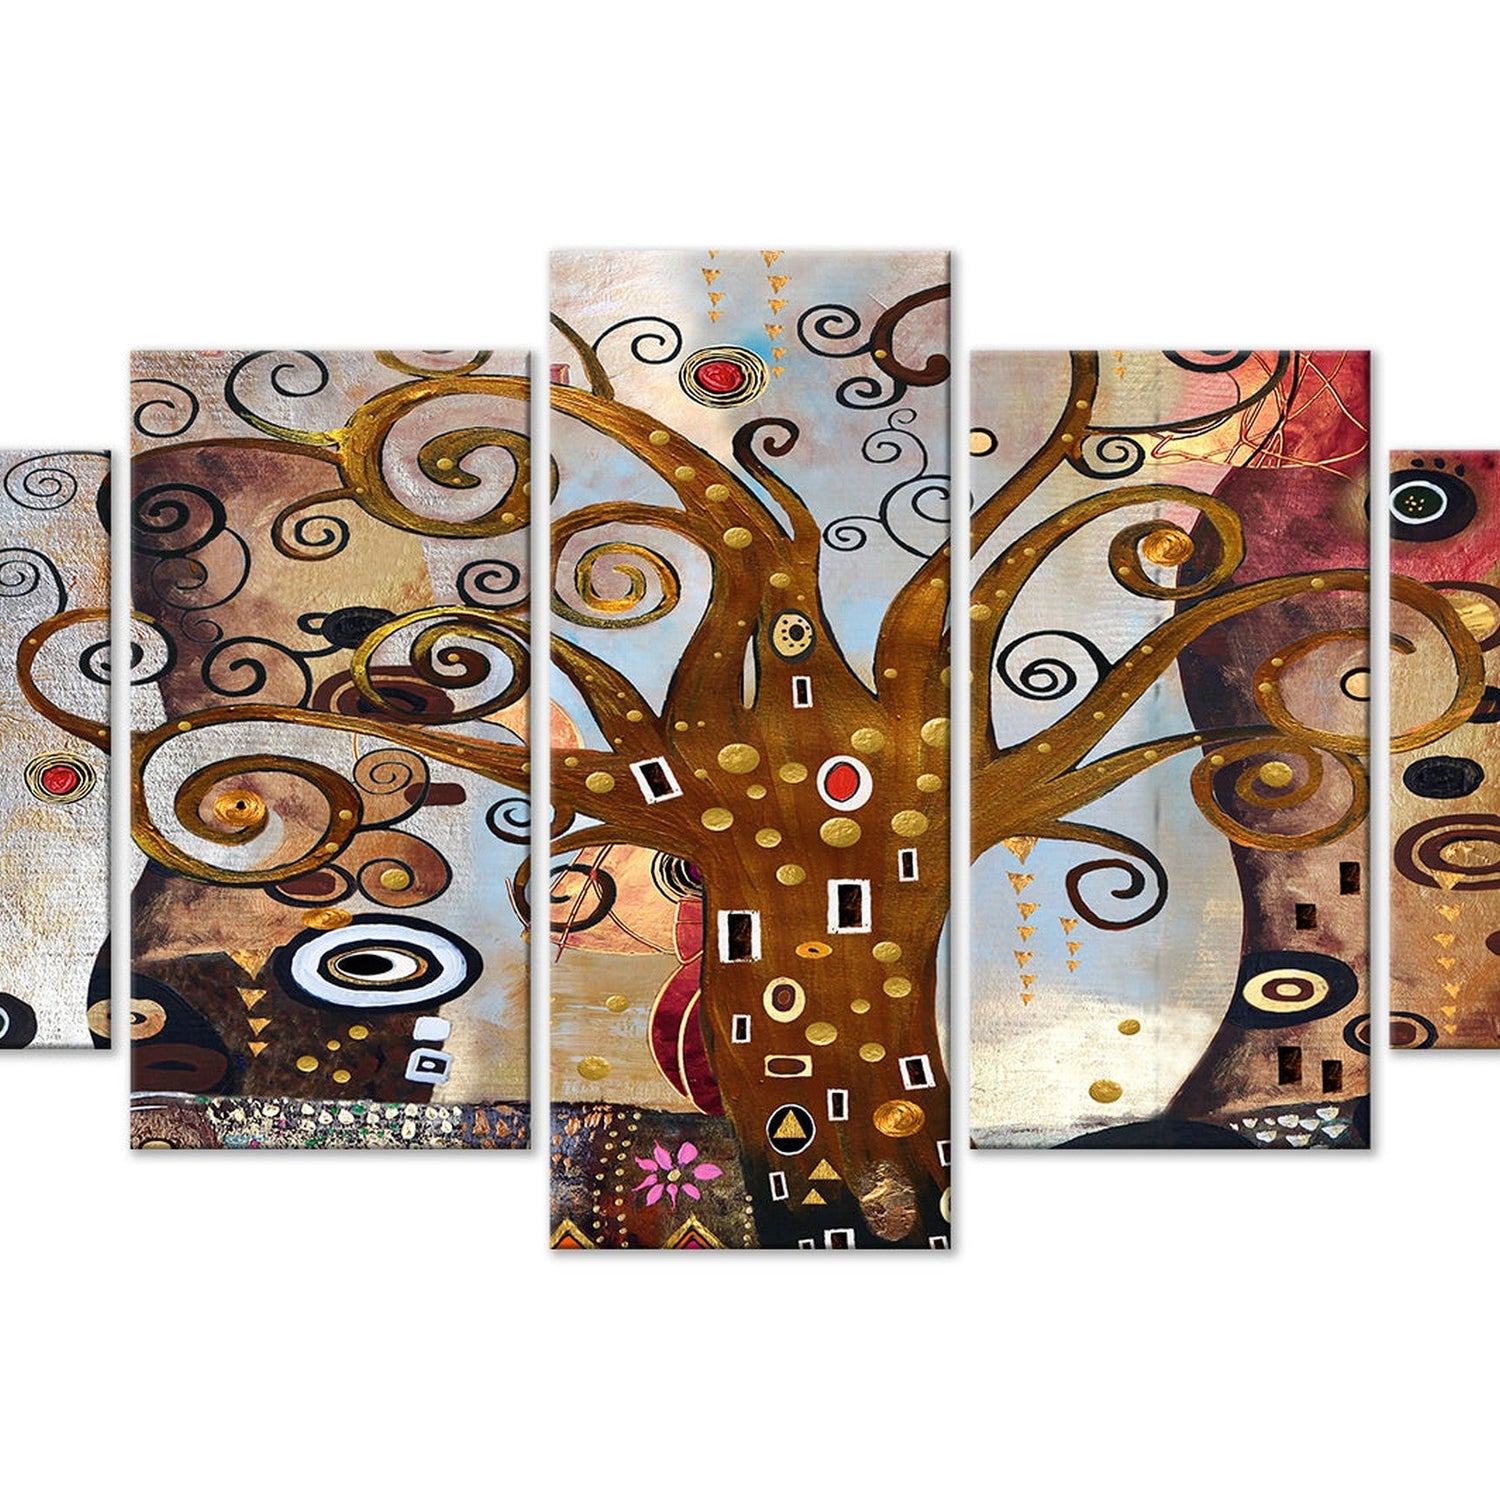 Abstract Canvas Wall Art - Joy Of Life - 5 Pieces